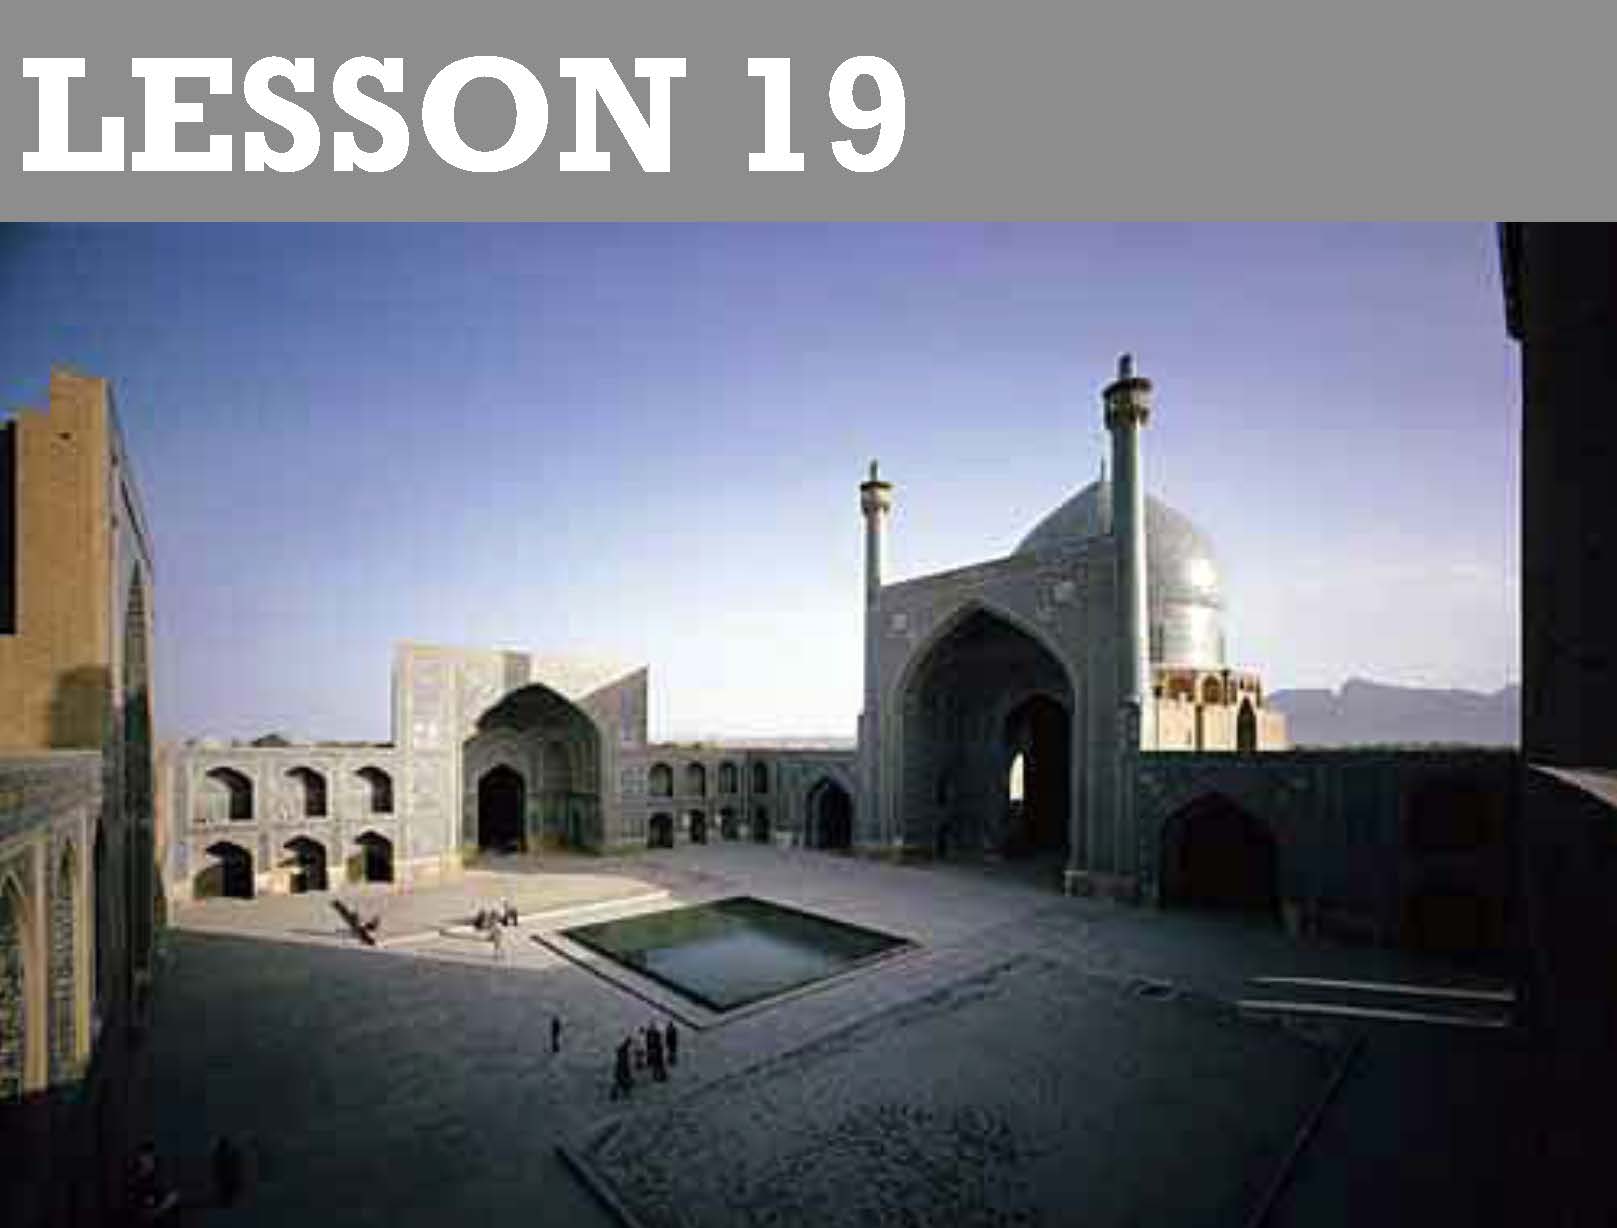 Masjid-i Shaykh Lutfallah - <p>The nineteenth lesson in a 22 lesson course on Monuments of Islamic Architecture developed by Professors Gulru Necipoglu and David Roxburgh at the Aga Khan Program for Islamic Architecture at Harvard University. This lesson explores the development of the Safavid empire, which reached its apex in the capital city of Isfahan. The city as a global metropolis is characterized by its economic growth, cultural efflorescence, and social diversity. Throughout this lesson we will explore how it was that the city evolved, as well as how it embodied ideas about the ruler, the state, and society, in addition to cultivating an economic upsurge.&nbsp;</p><p>What is the story that the city is telling us about the Safavid elite and its relationship to this multi-ethnic, multi-confessional population?</p><div><br></div><p></p>